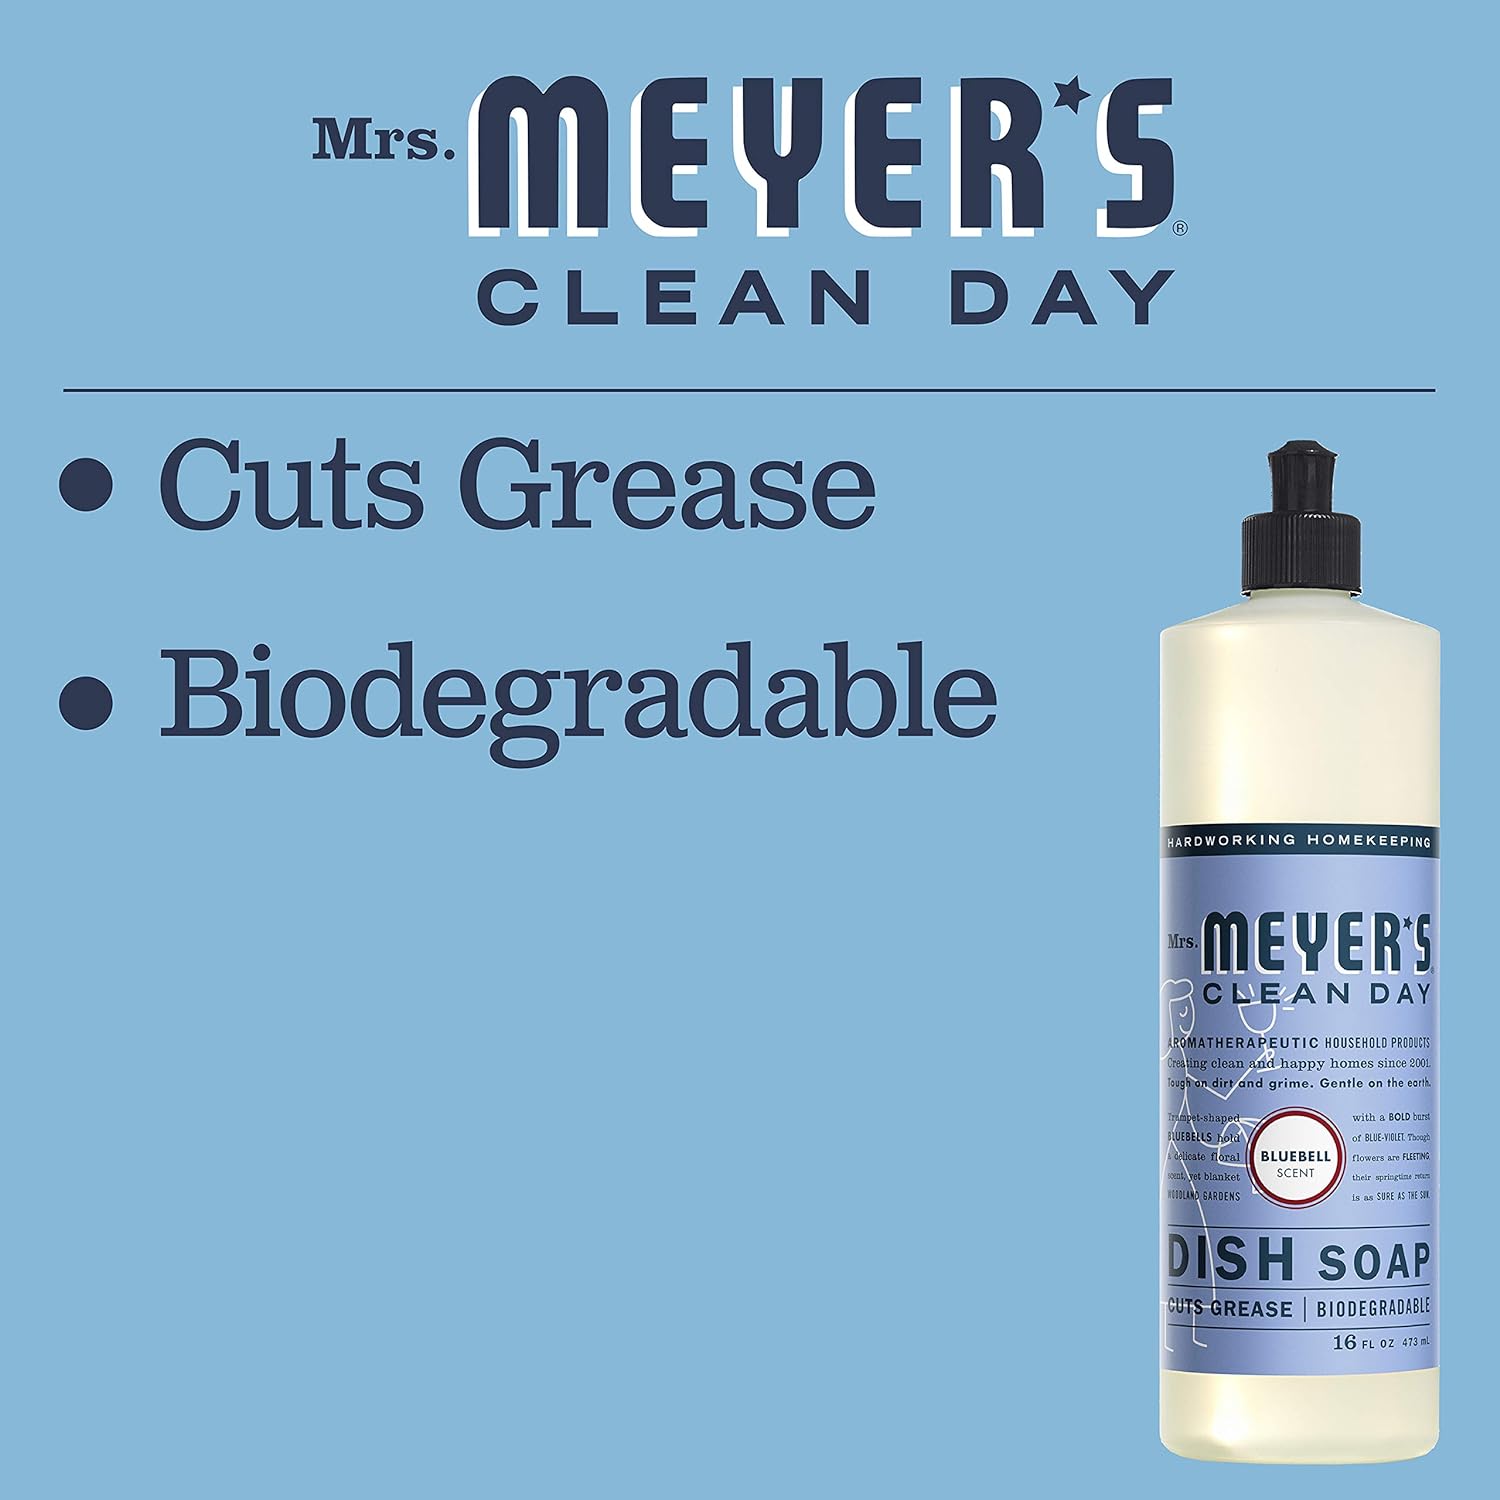 MRS. MEYER'S CLEAN DAY Liquid Dish Soap (16 Ounce (Pack - 6)) : Health & Household